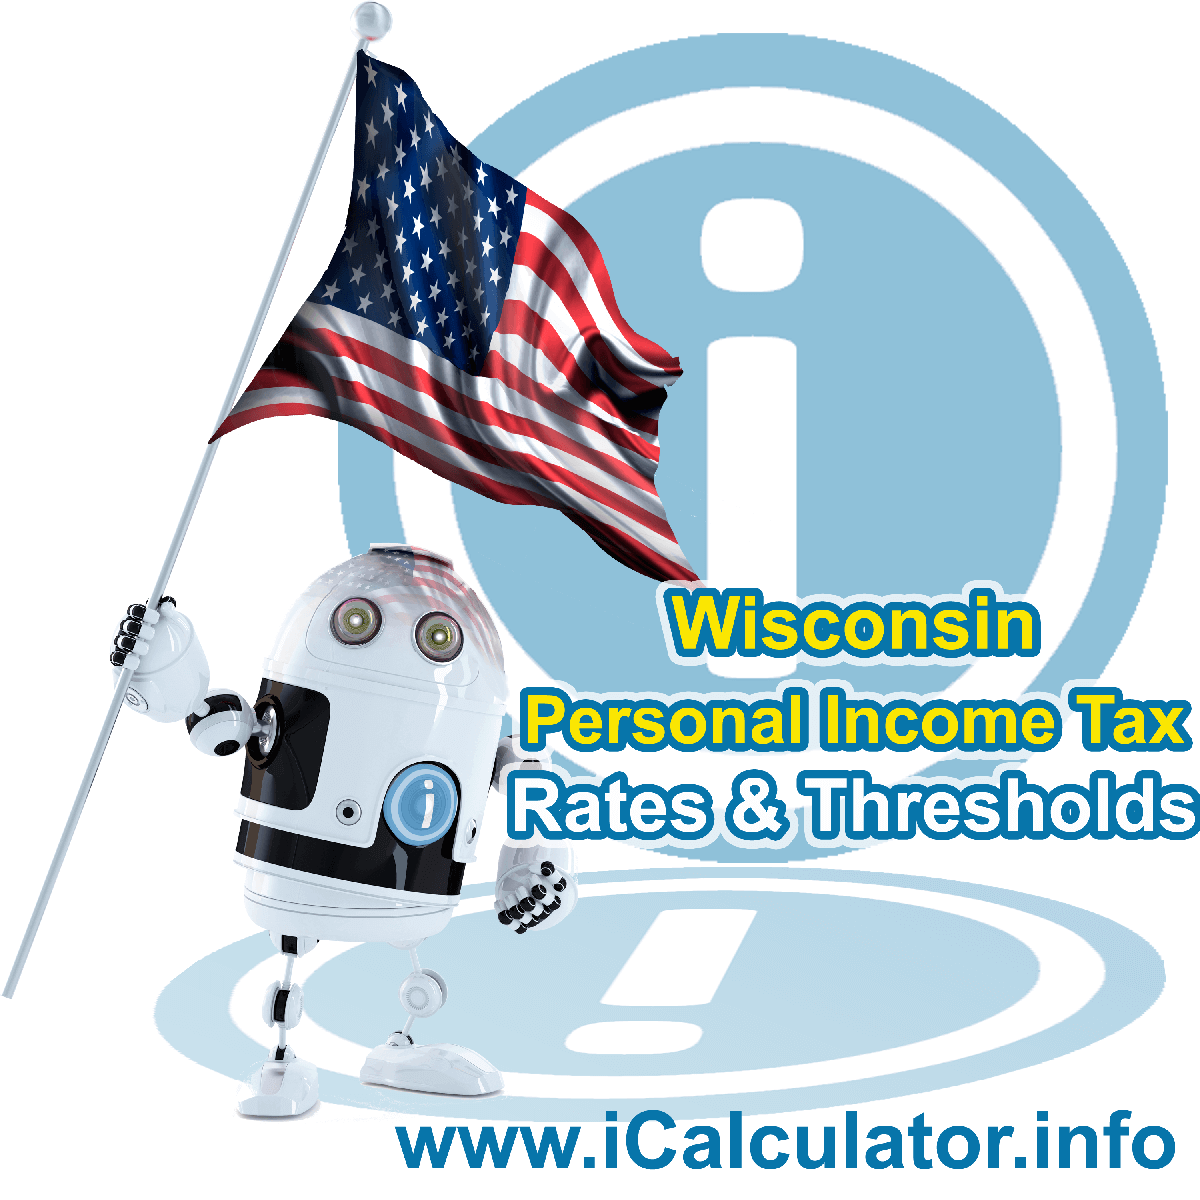 Wisconsin State Tax Tables 2022. This image displays details of the Wisconsin State Tax Tables for the 2022 tax return year which is provided in support of the 2022 US Tax Calculator